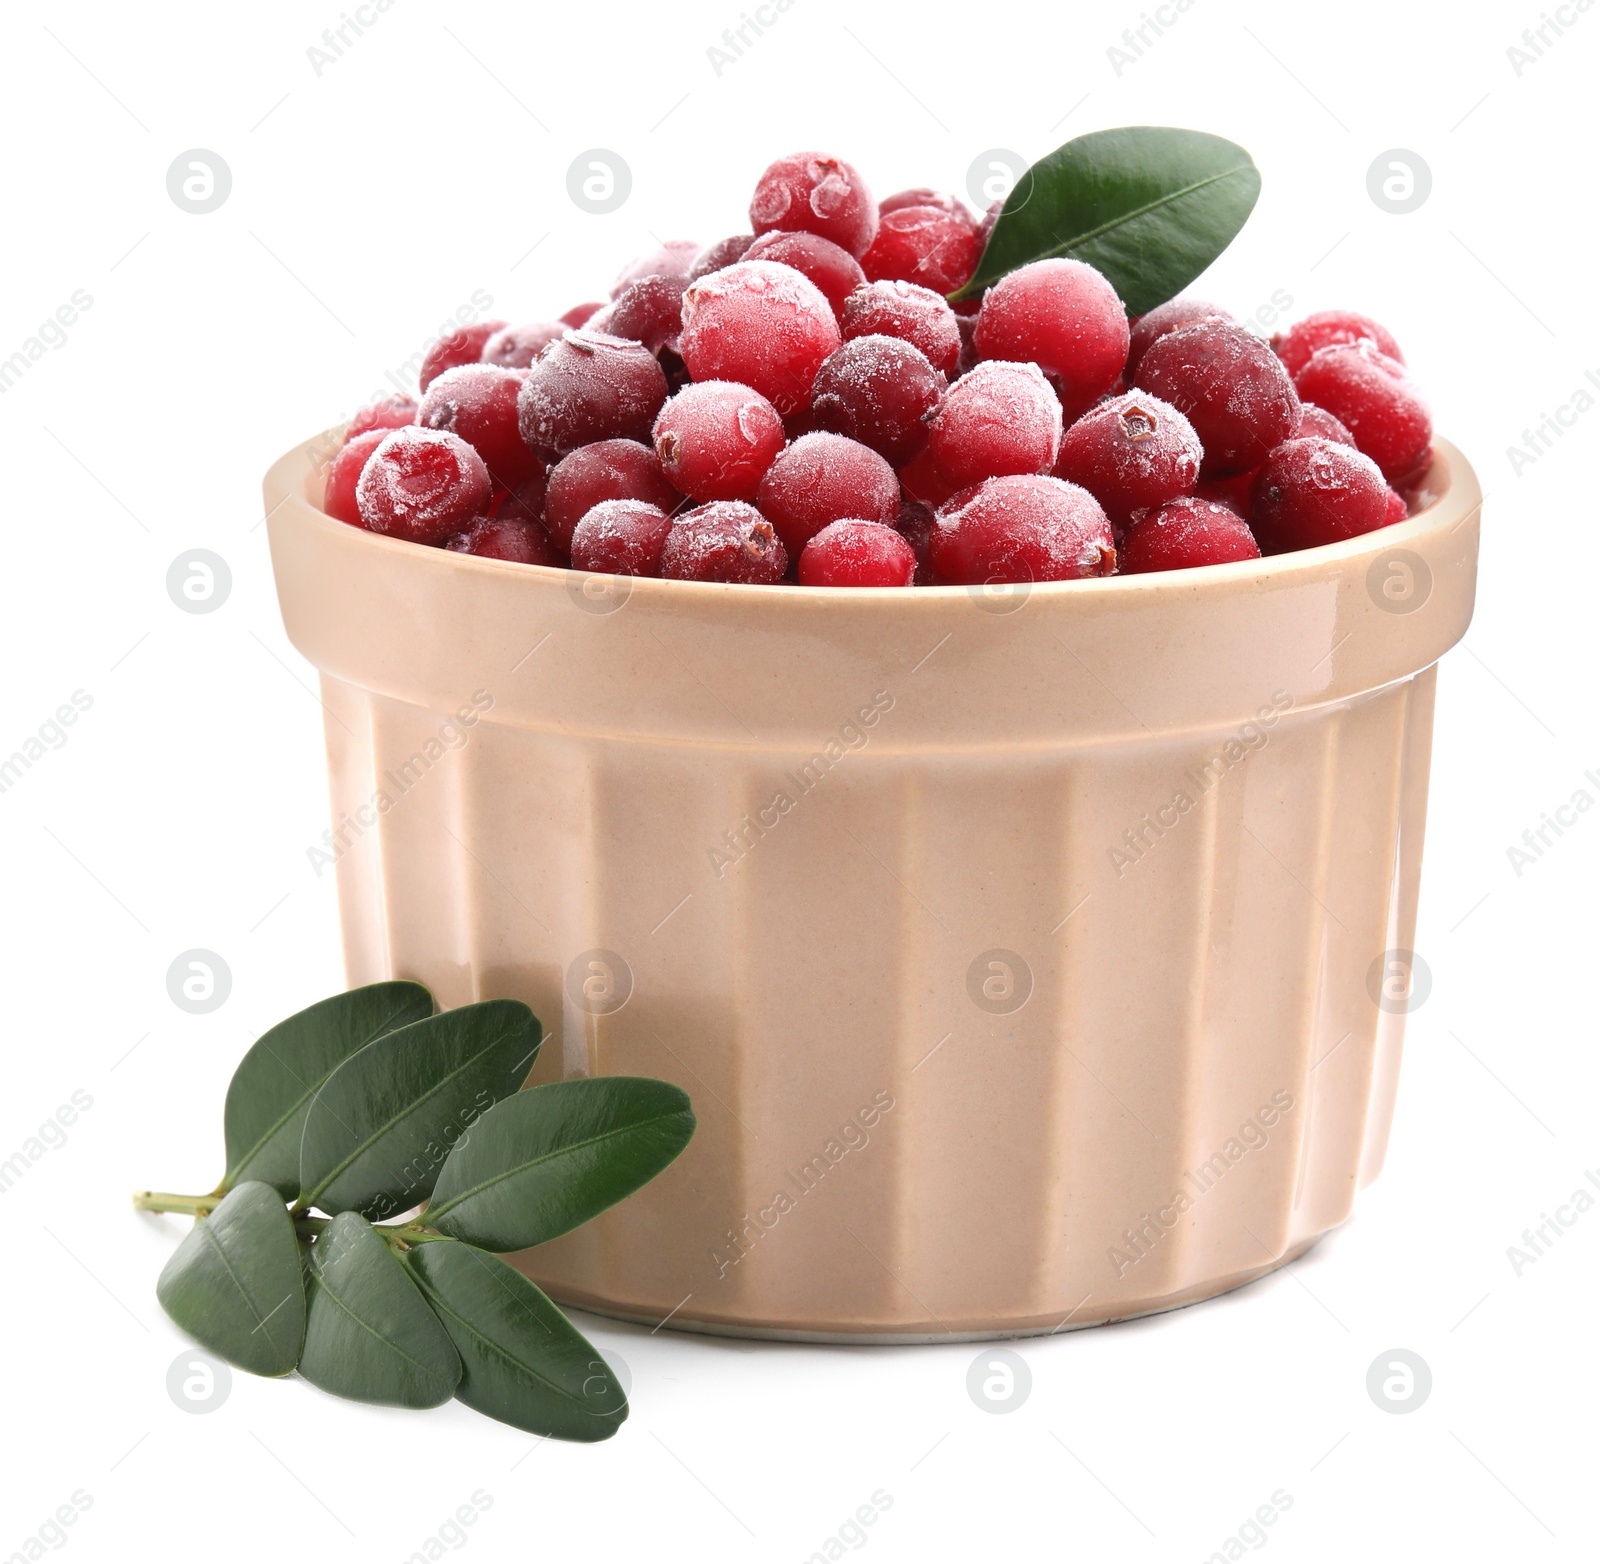 Photo of Frozen red cranberries in bowl and green leaves isolated on white